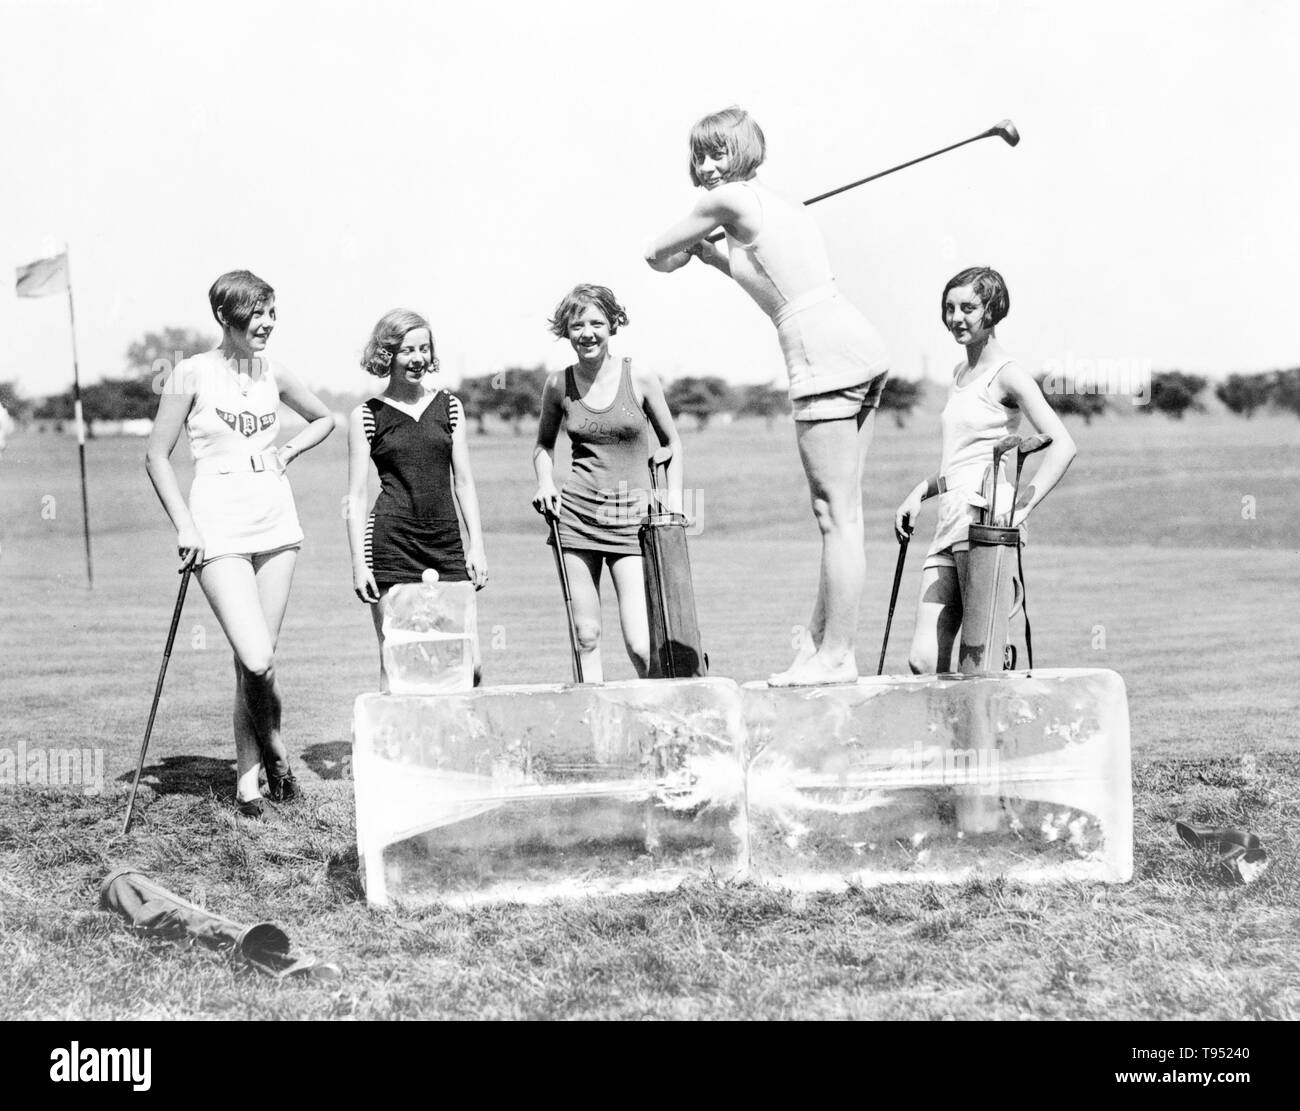 Entitled: 'Icing off at the tee' shows Miss Dorothy Kelly teeing off on a cake of ice. The others in the group are Misses Virginia Hunter, Elaine Griggs, Hazel Brown, and Mary Kaminsky, Washington, D.C. area. Golf is a club and ball sport in which players use various clubs to hit balls into a series of holes on a course in as few strokes as possible. National Photo Company, 1920s. Stock Photo